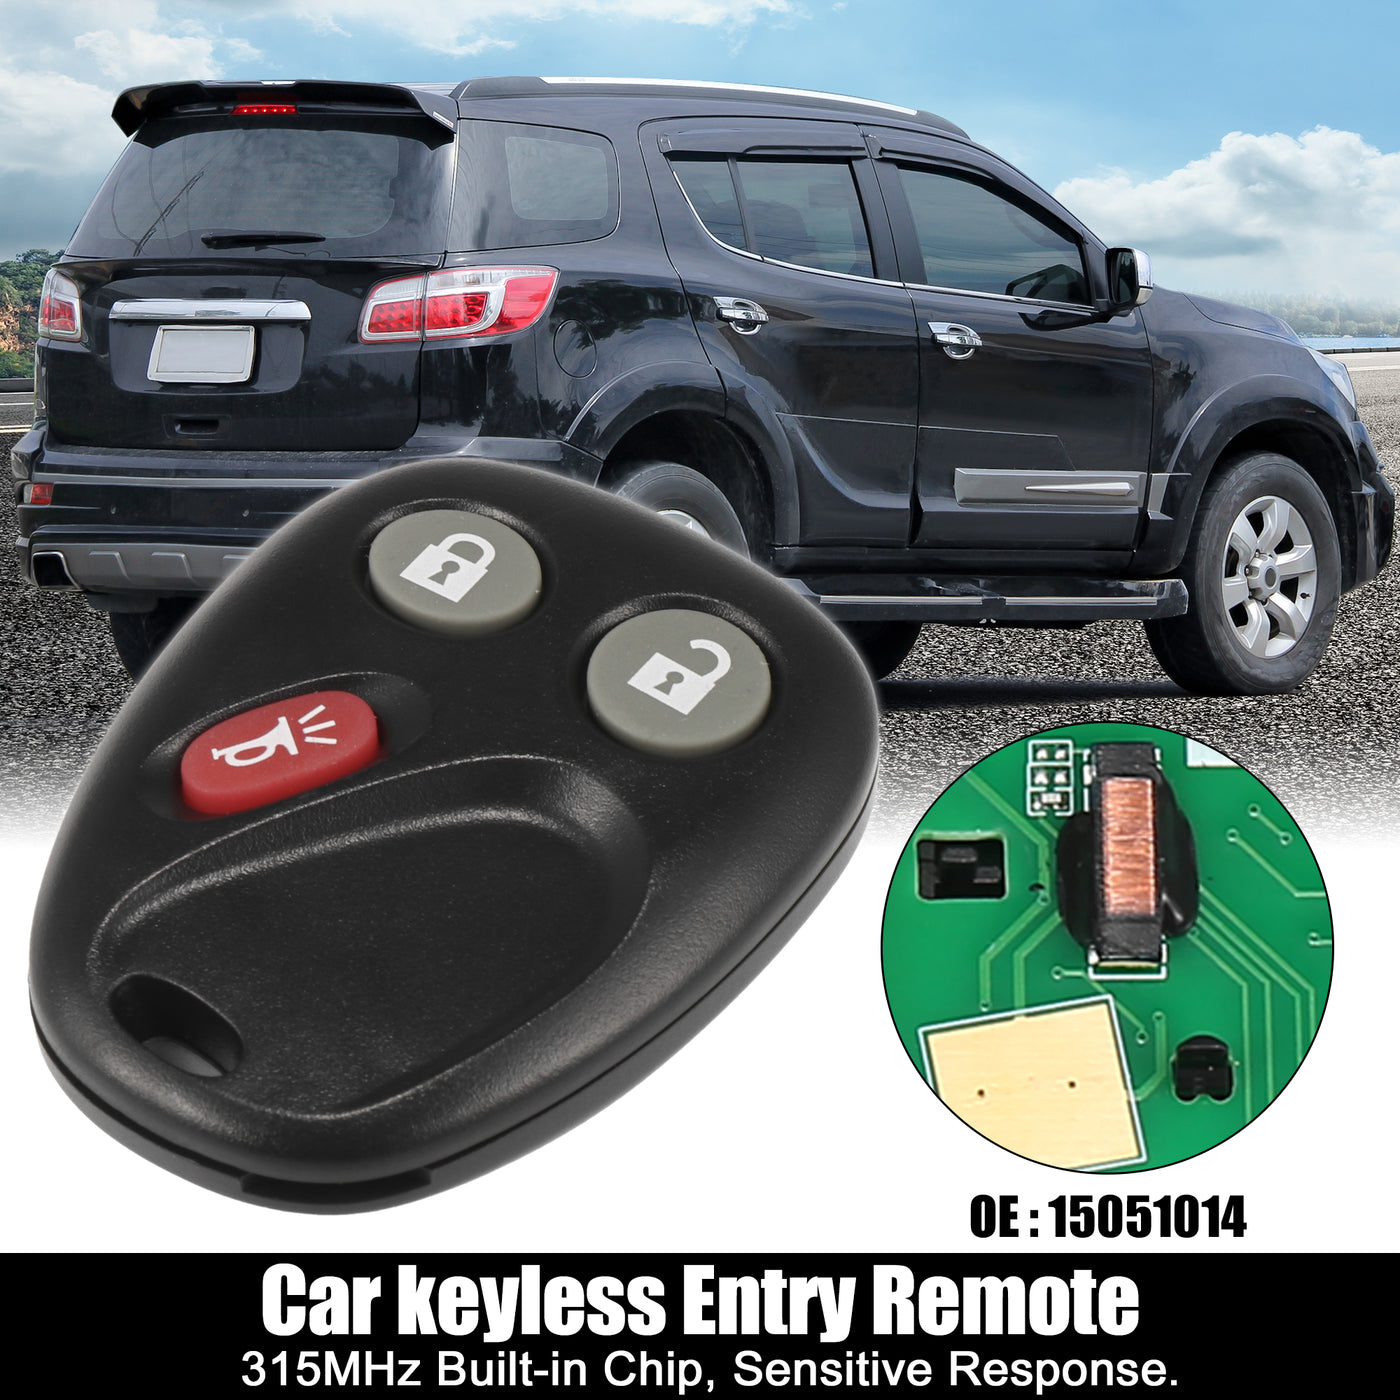 X AUTOHAUX 315MHz MYT3X6898B Replacement Keyless Entry Remote Car Key Fob for Chevy Trailblazer for GMC Envoy 2002-2007 for Isuzu Ascender 2003-2008 for Buick Rainier 2004-2007 3 Buttons